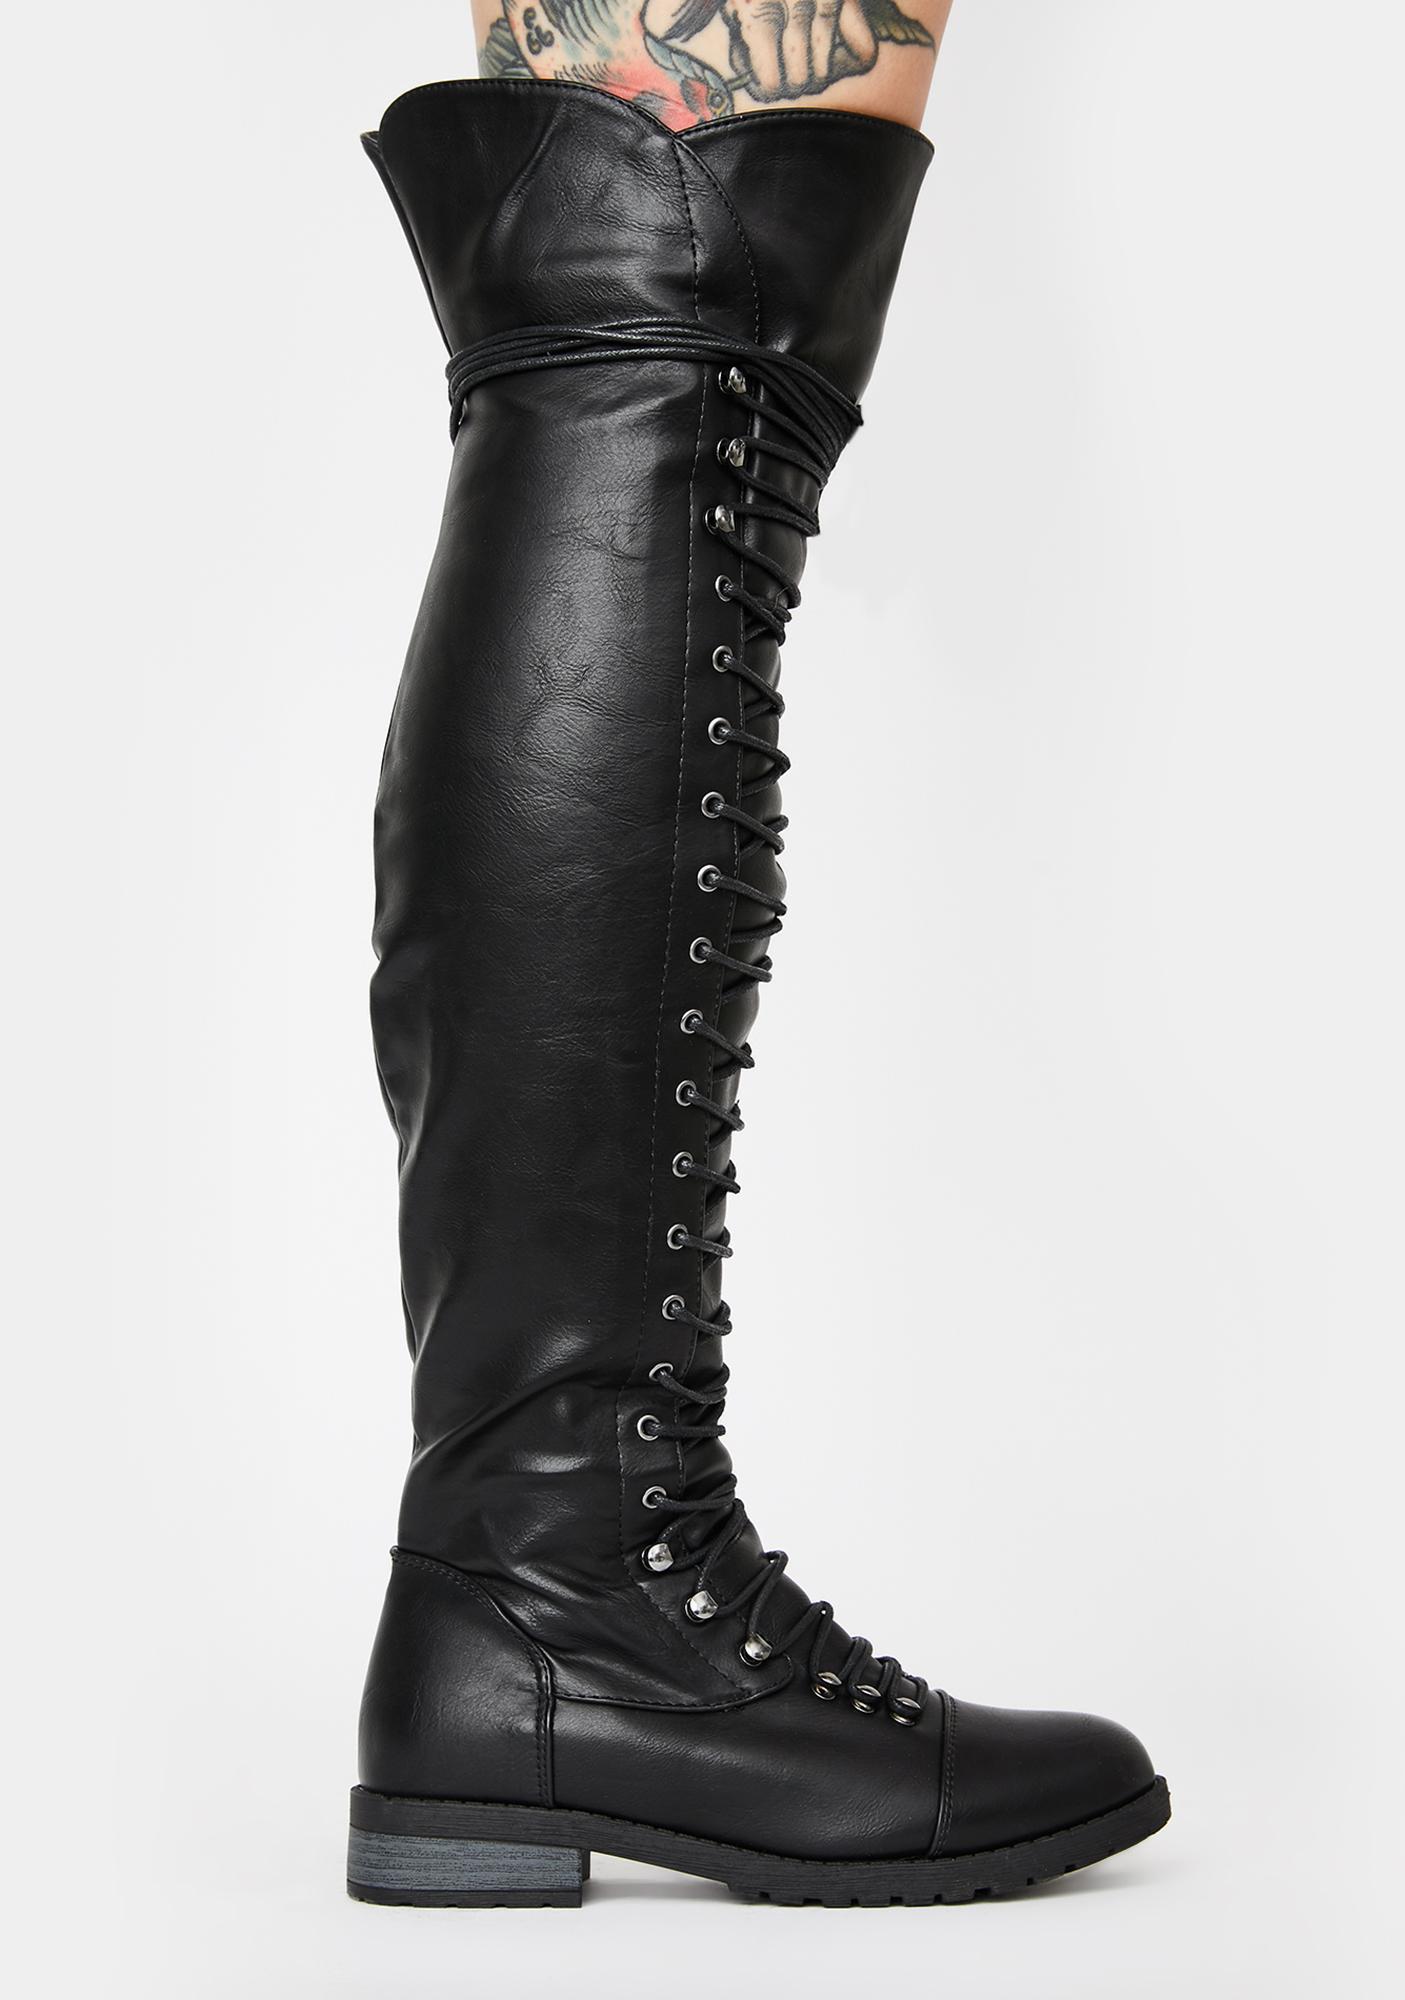 Lace Up Knee High Vegan Leather Boots Black | Dolls Kill